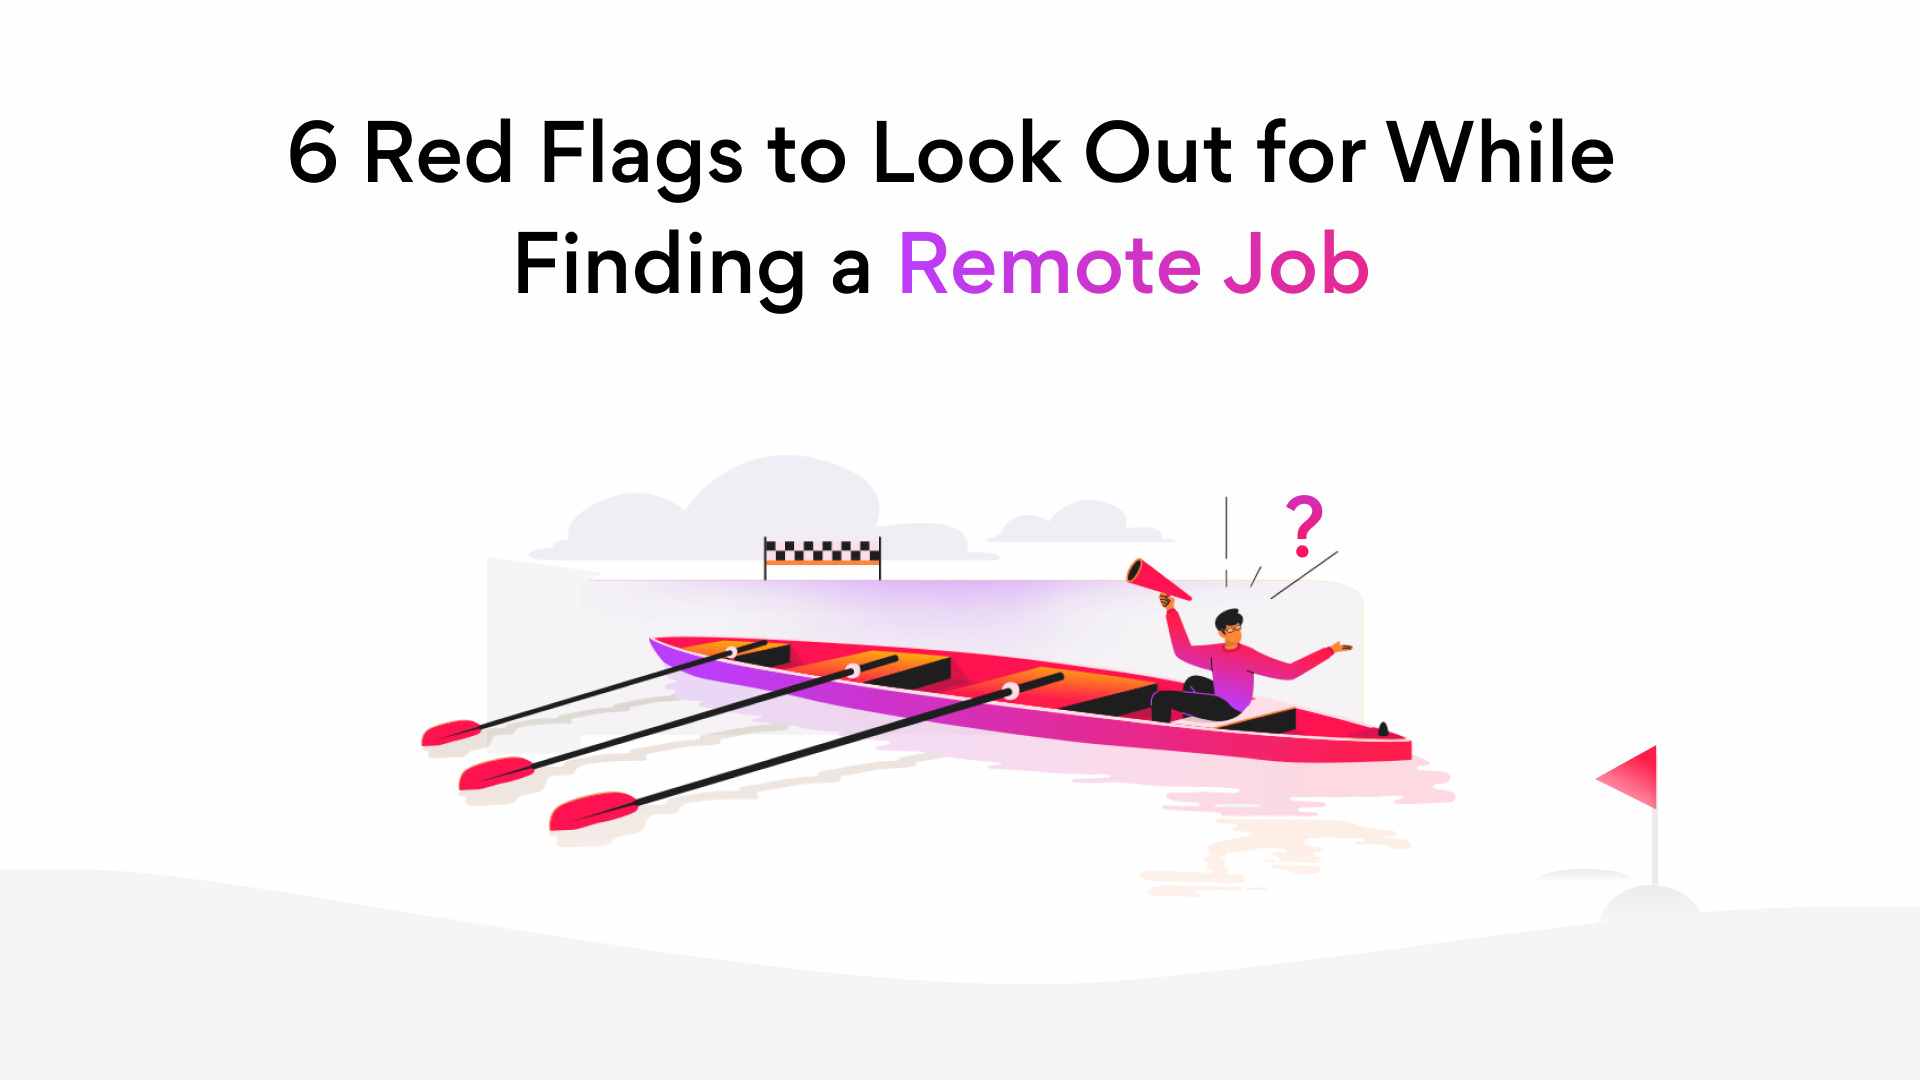 Red Flags to Look Out for While Finding a Remote Job